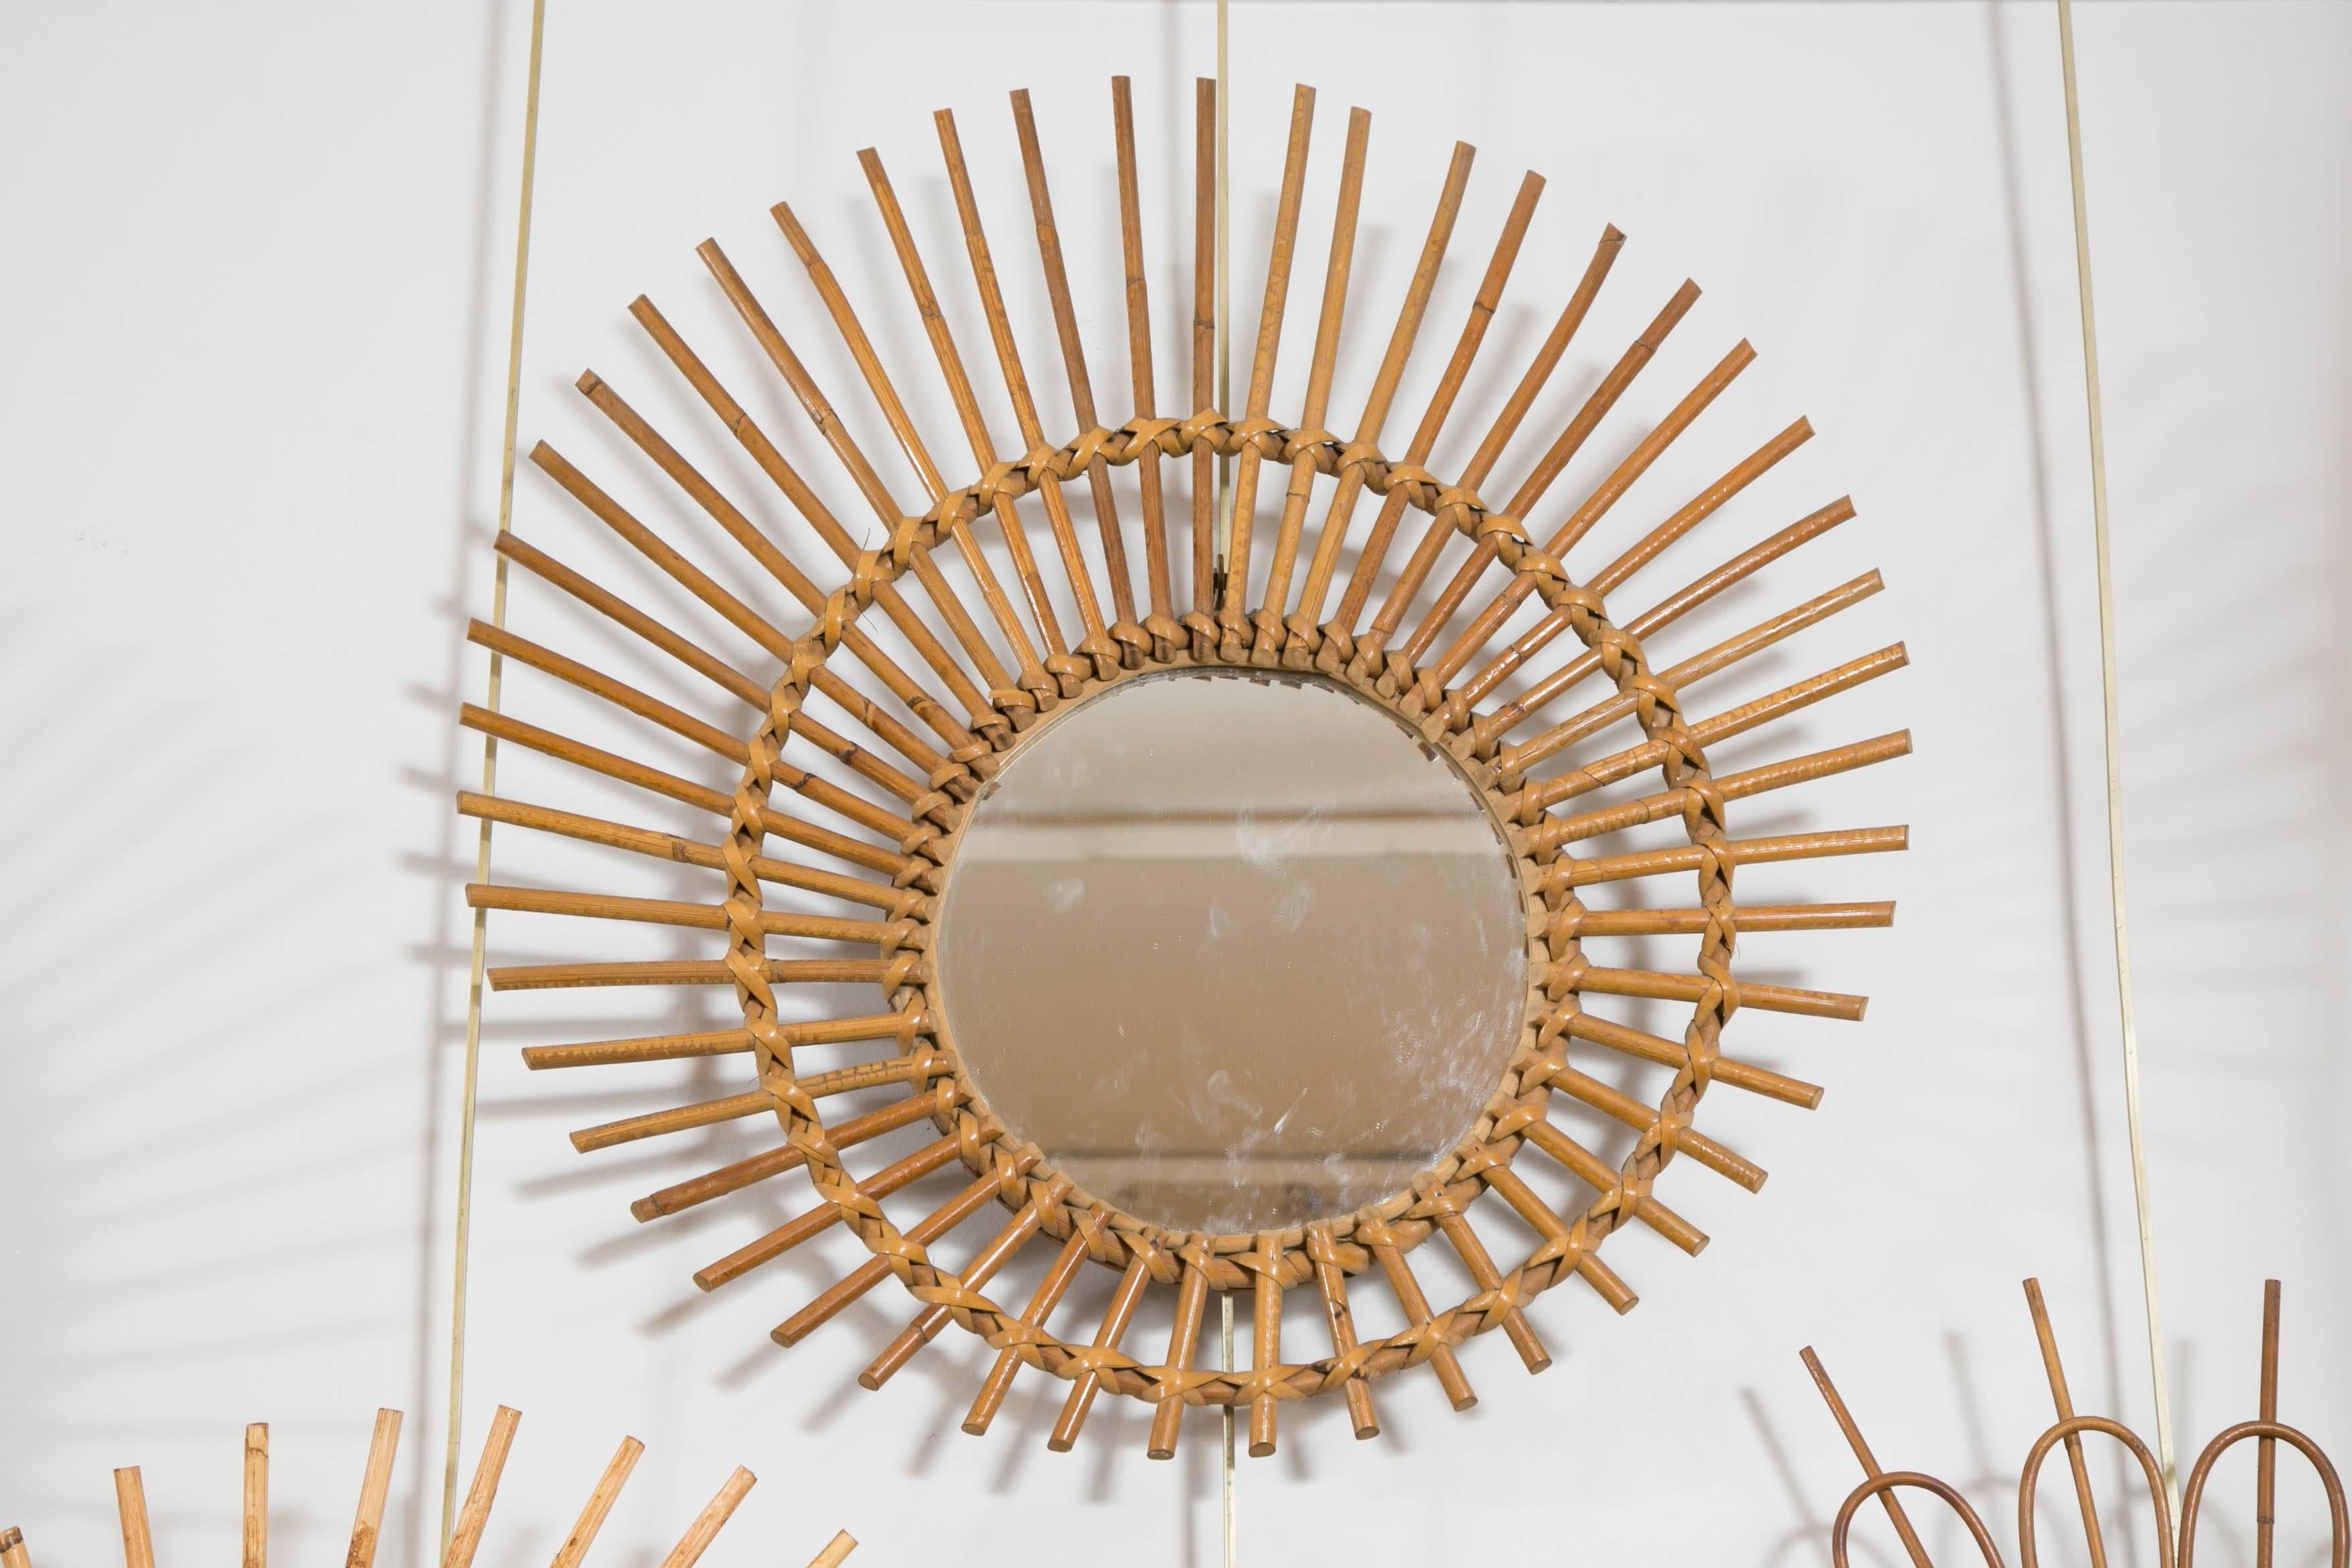 Rustic Collection of Nine Rattan or Wicker Sunburst Mirrors, France or Italy, 1960s